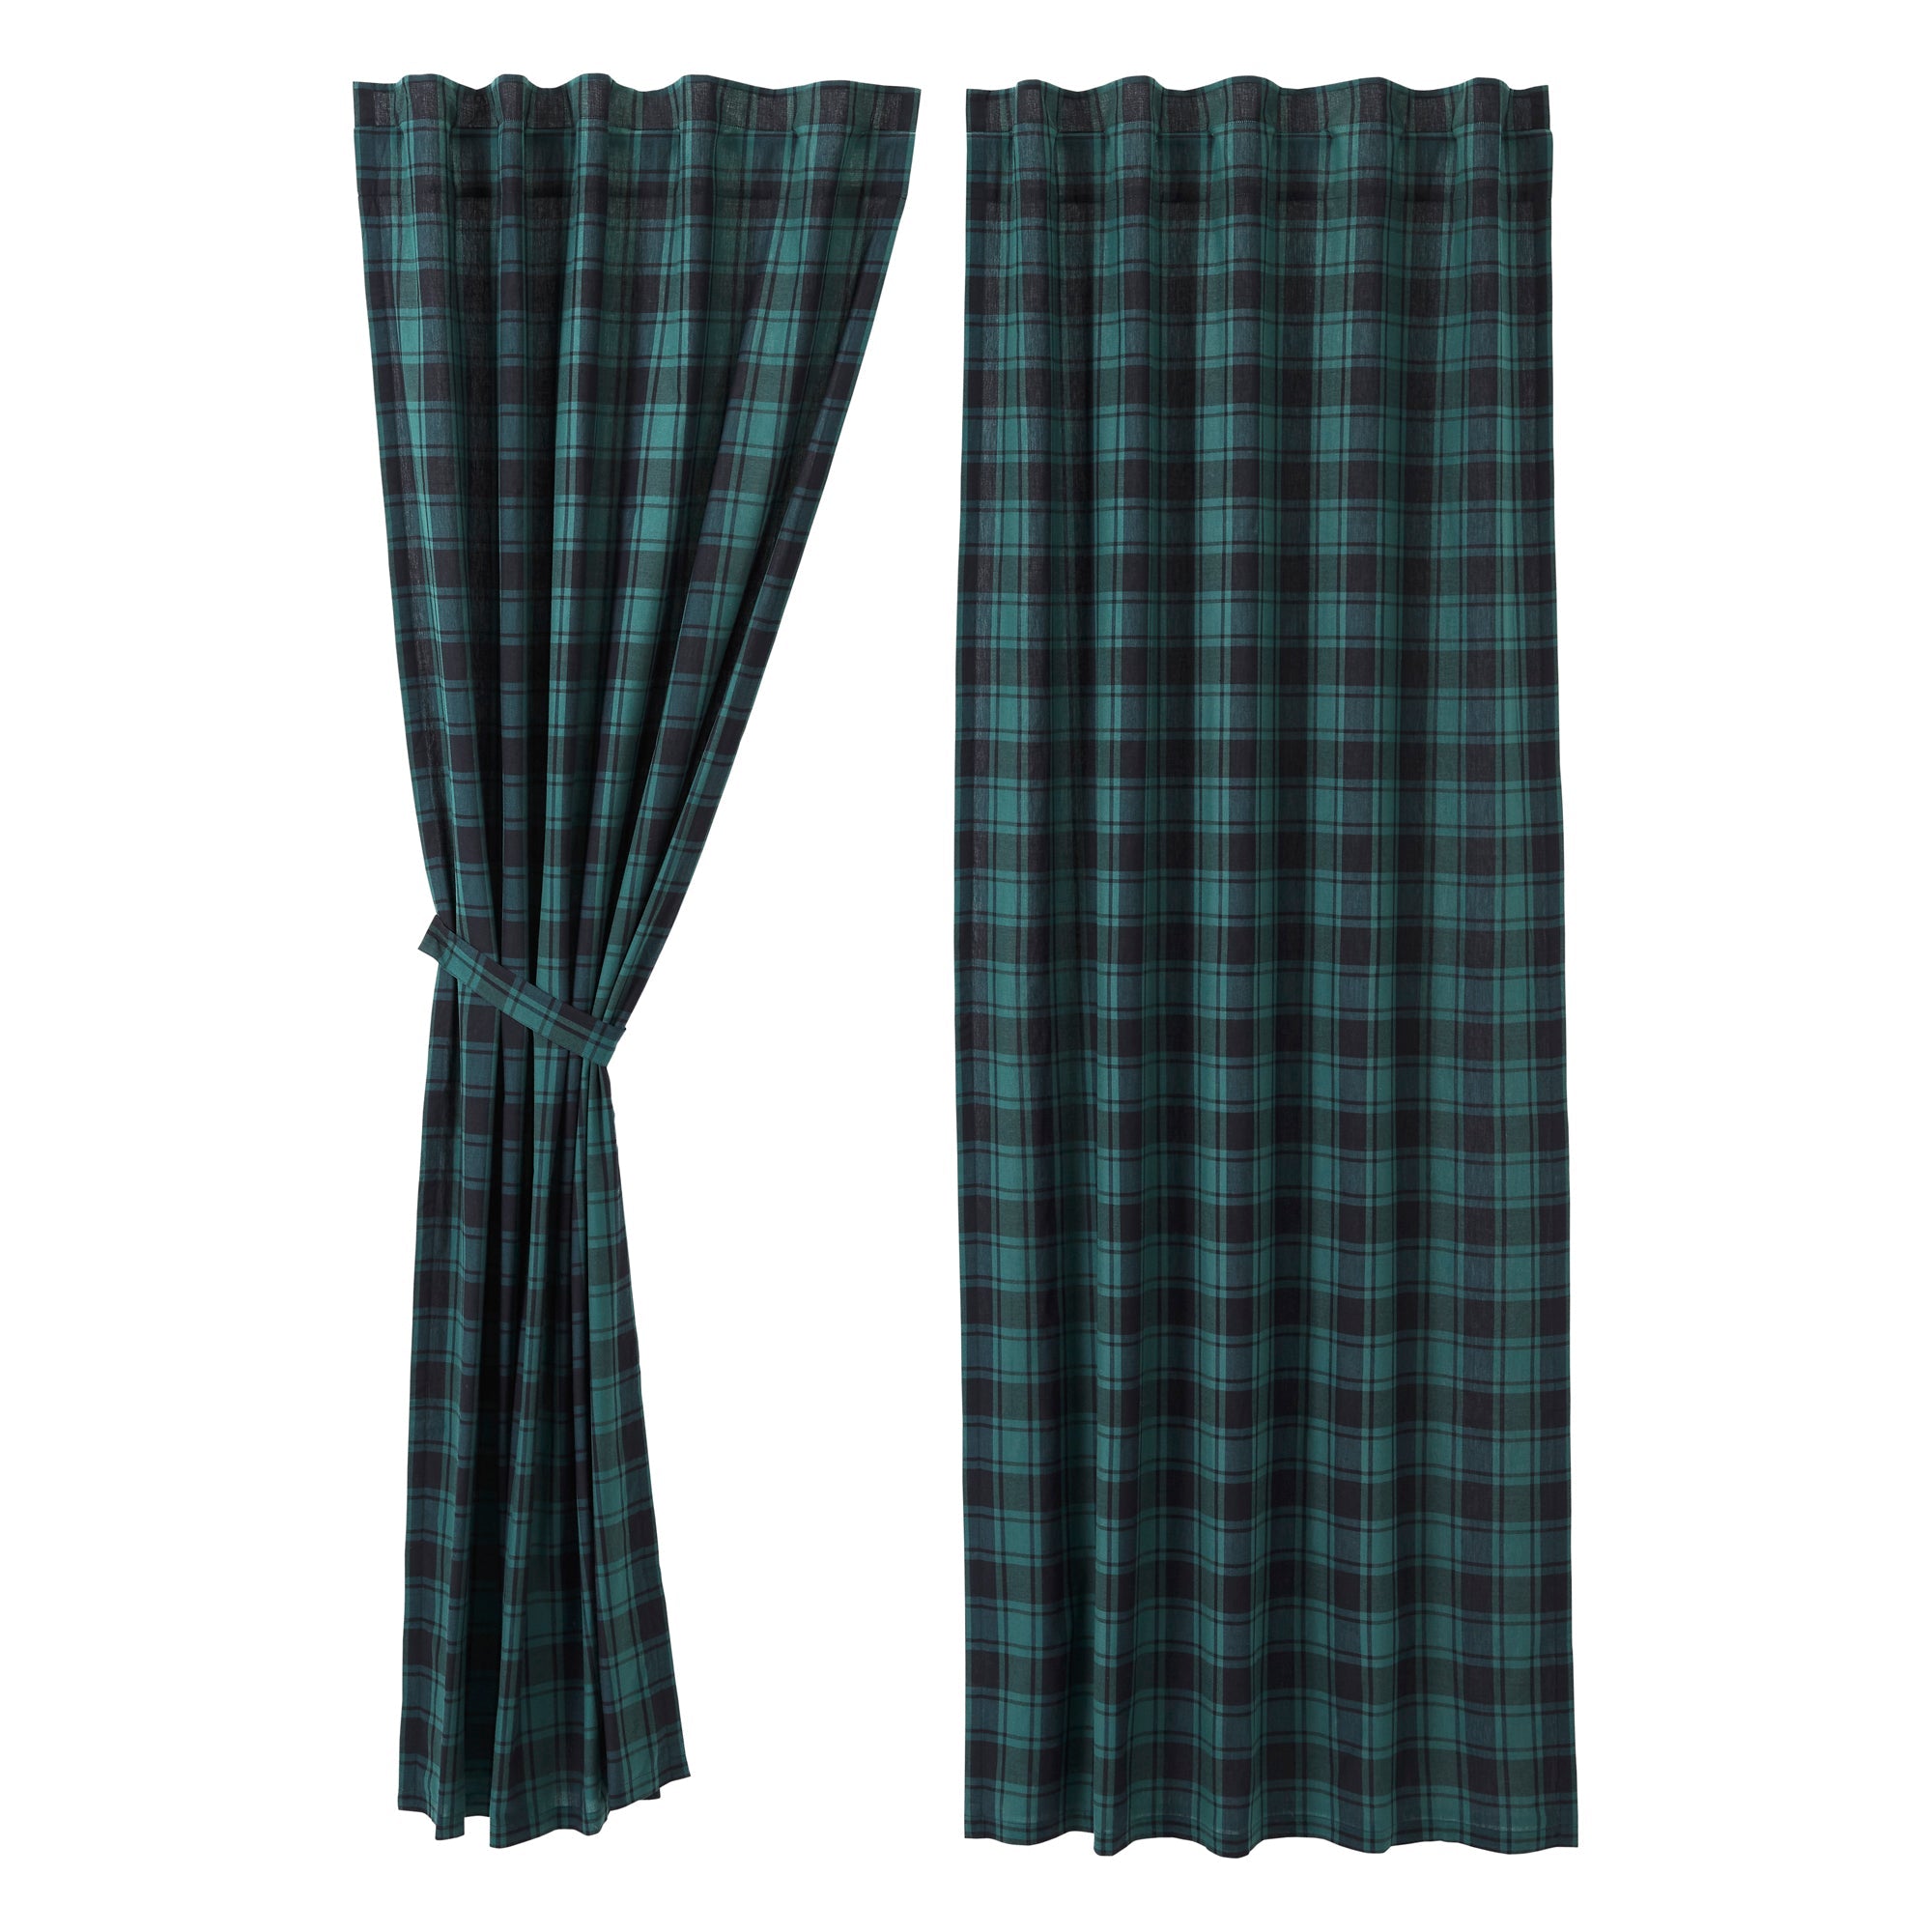 Pine Grove Panel Curtain Set of 2 84x40 VHC Brands